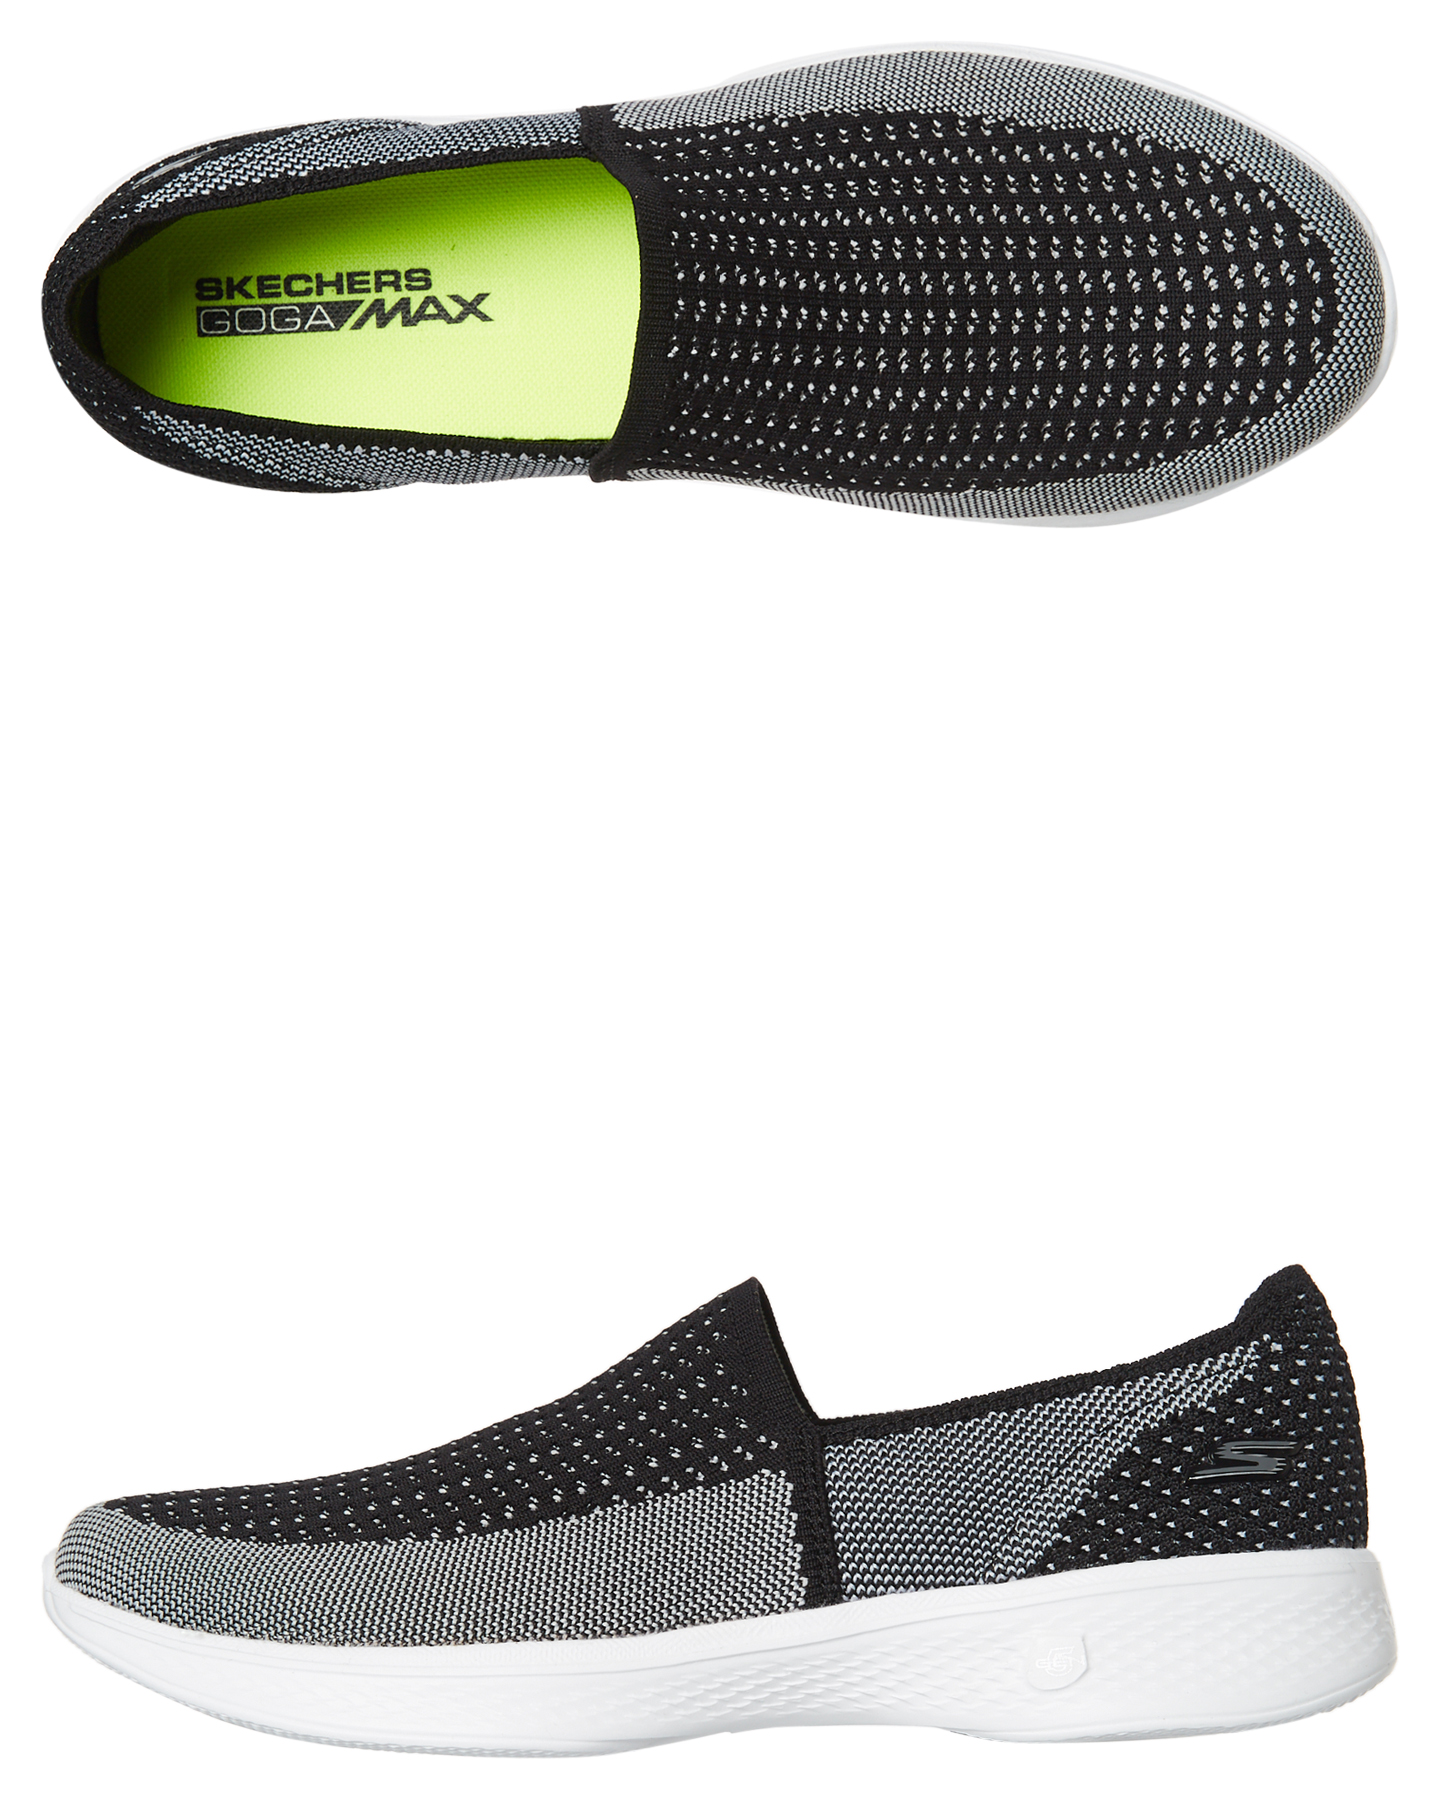 new skechers slip on shoes Sale,up to 